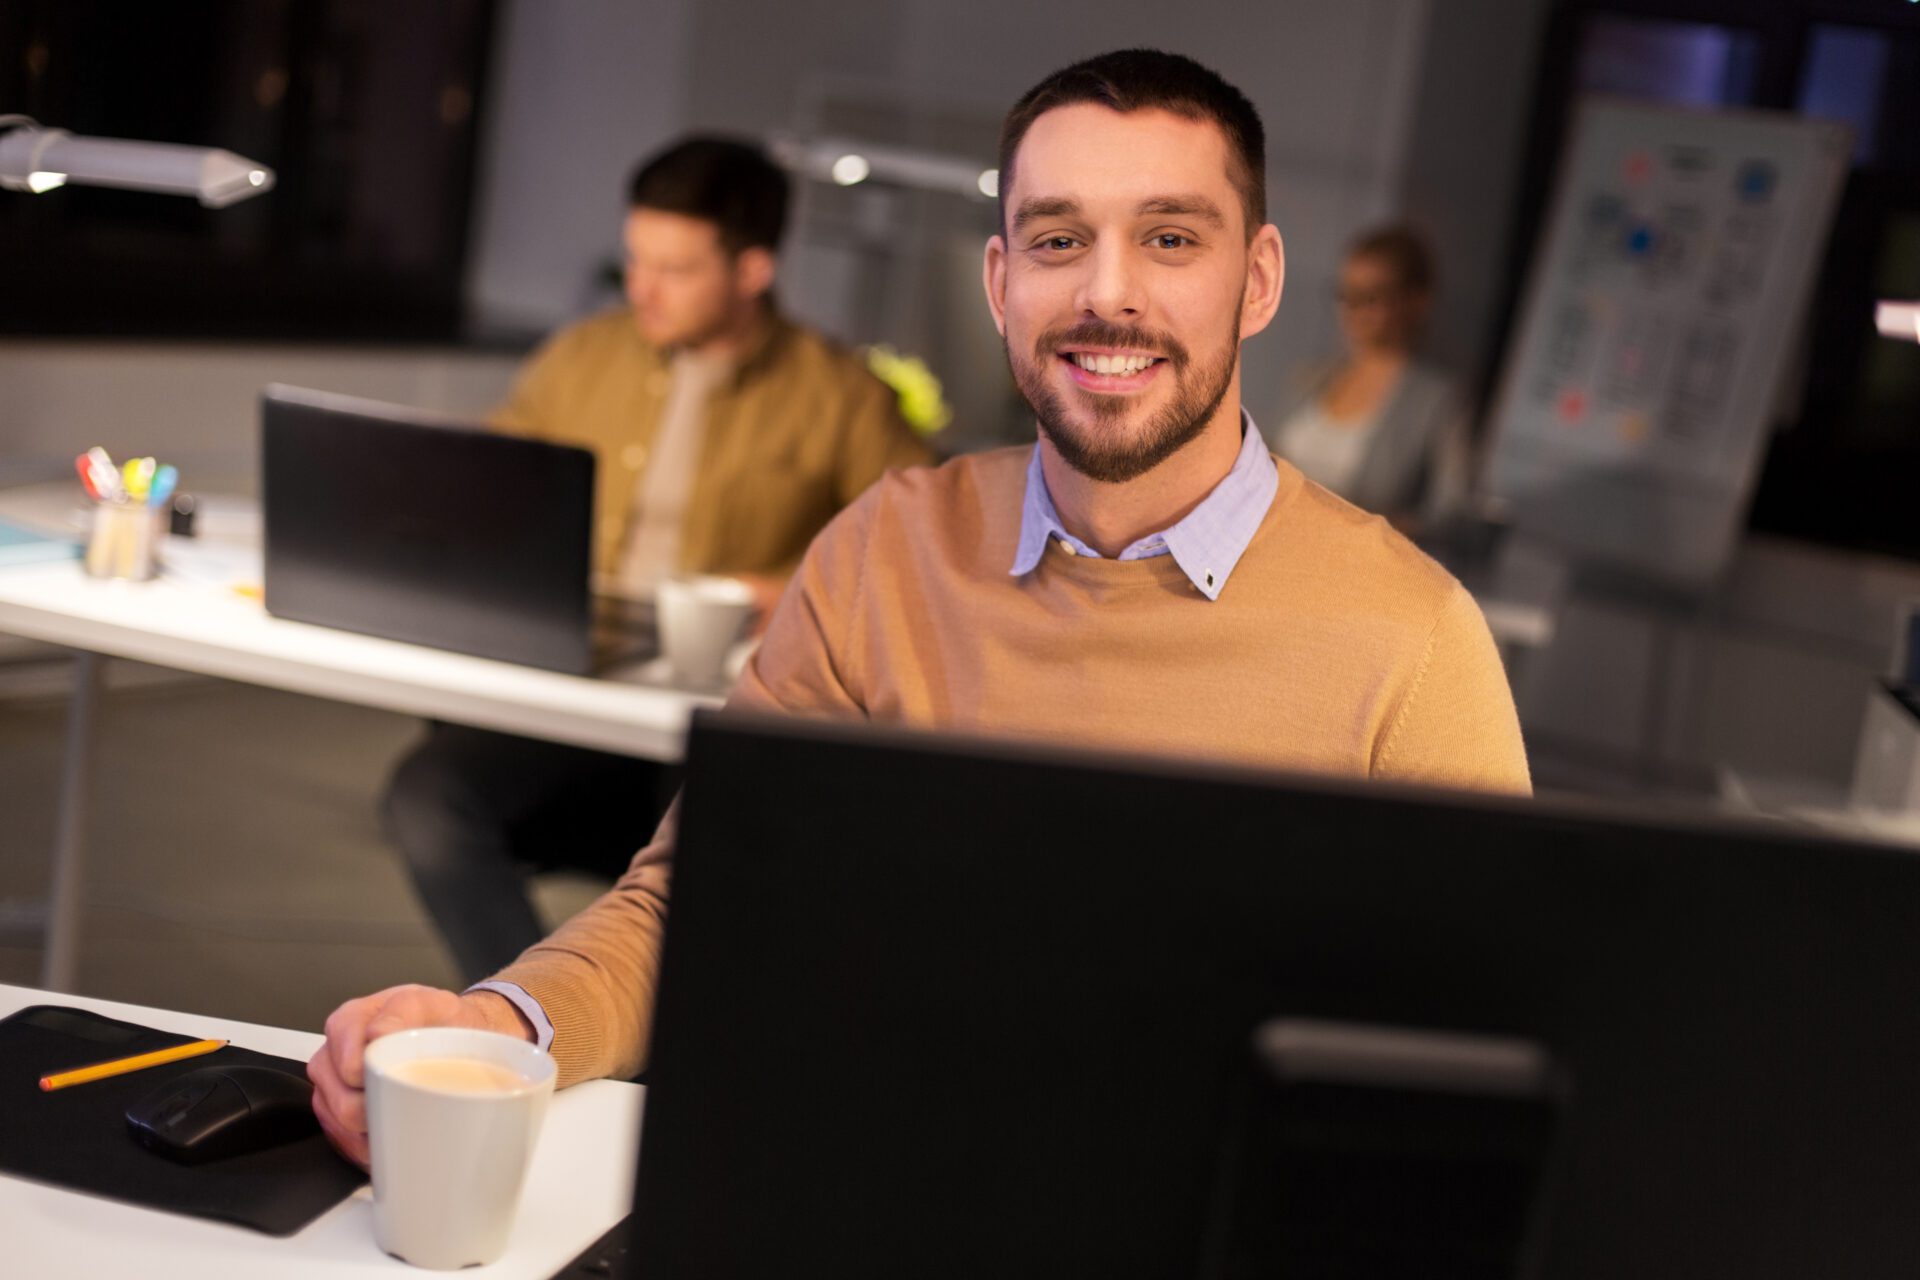 technician smiling with a mug work on a computer